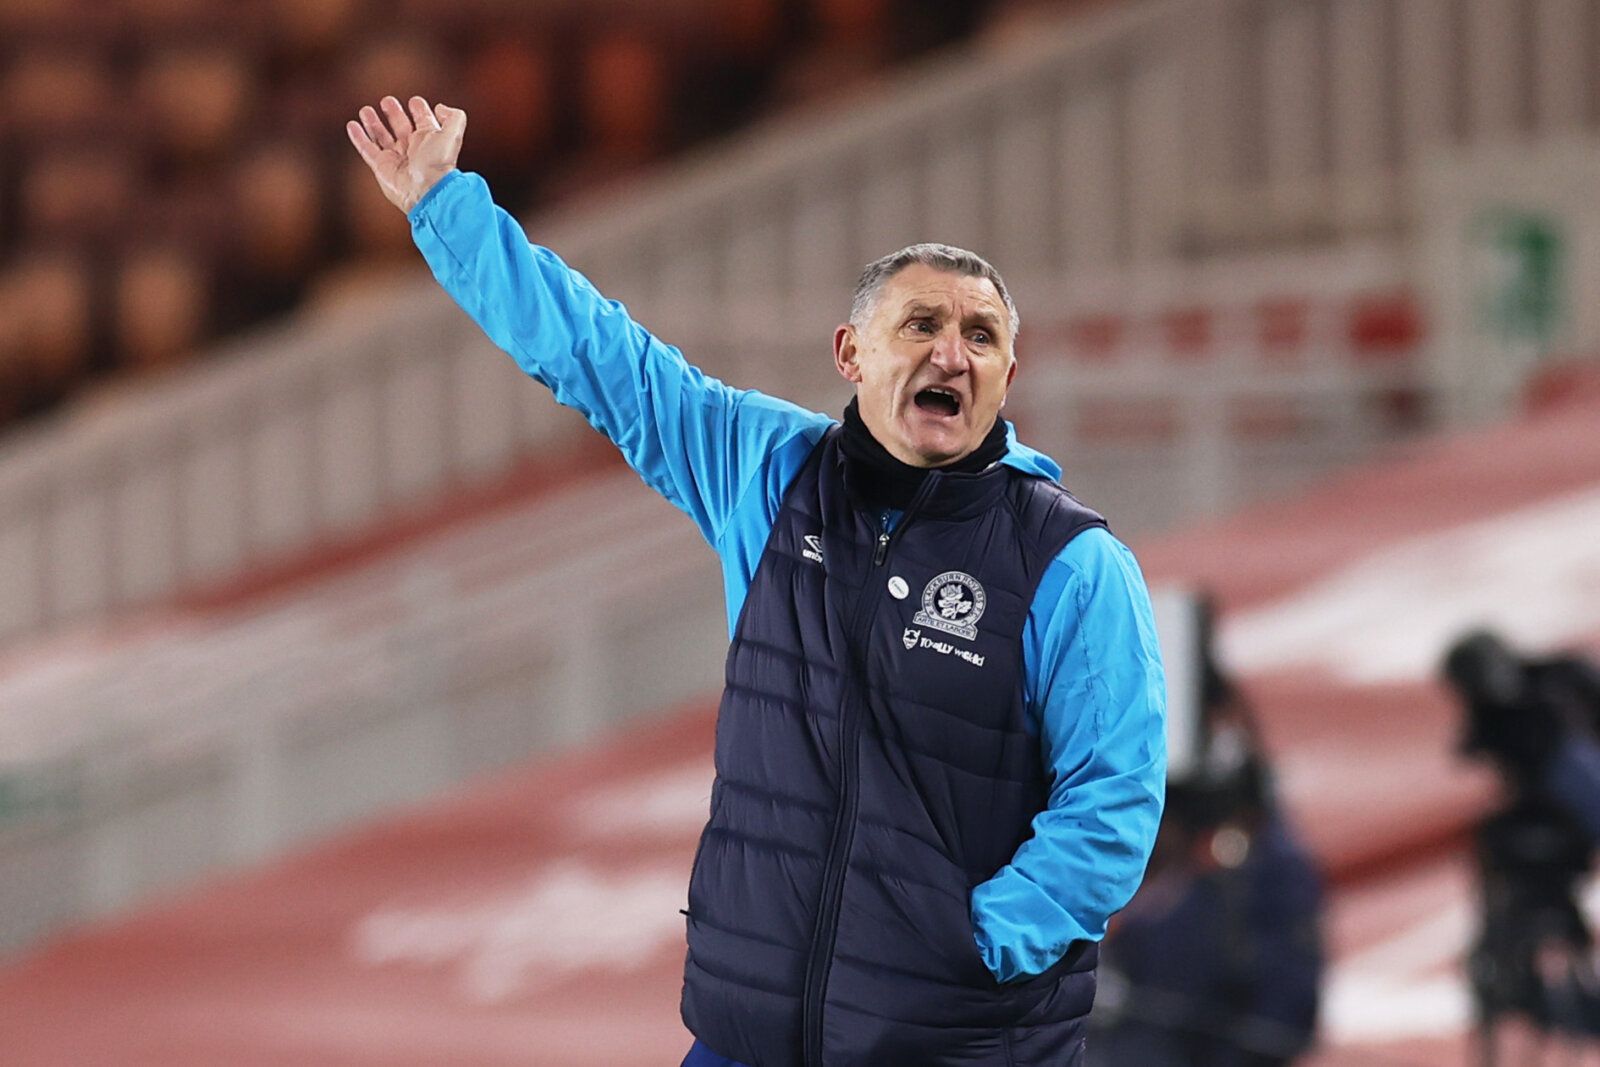 Soccer Football - Championship - Middlesbrough v Blackburn Rovers - Riverside Stadium, Middlesbrough, Britain - January 24, 2021 Blackburn manager Tony Mowbray reacts Action Images/Lee Smith